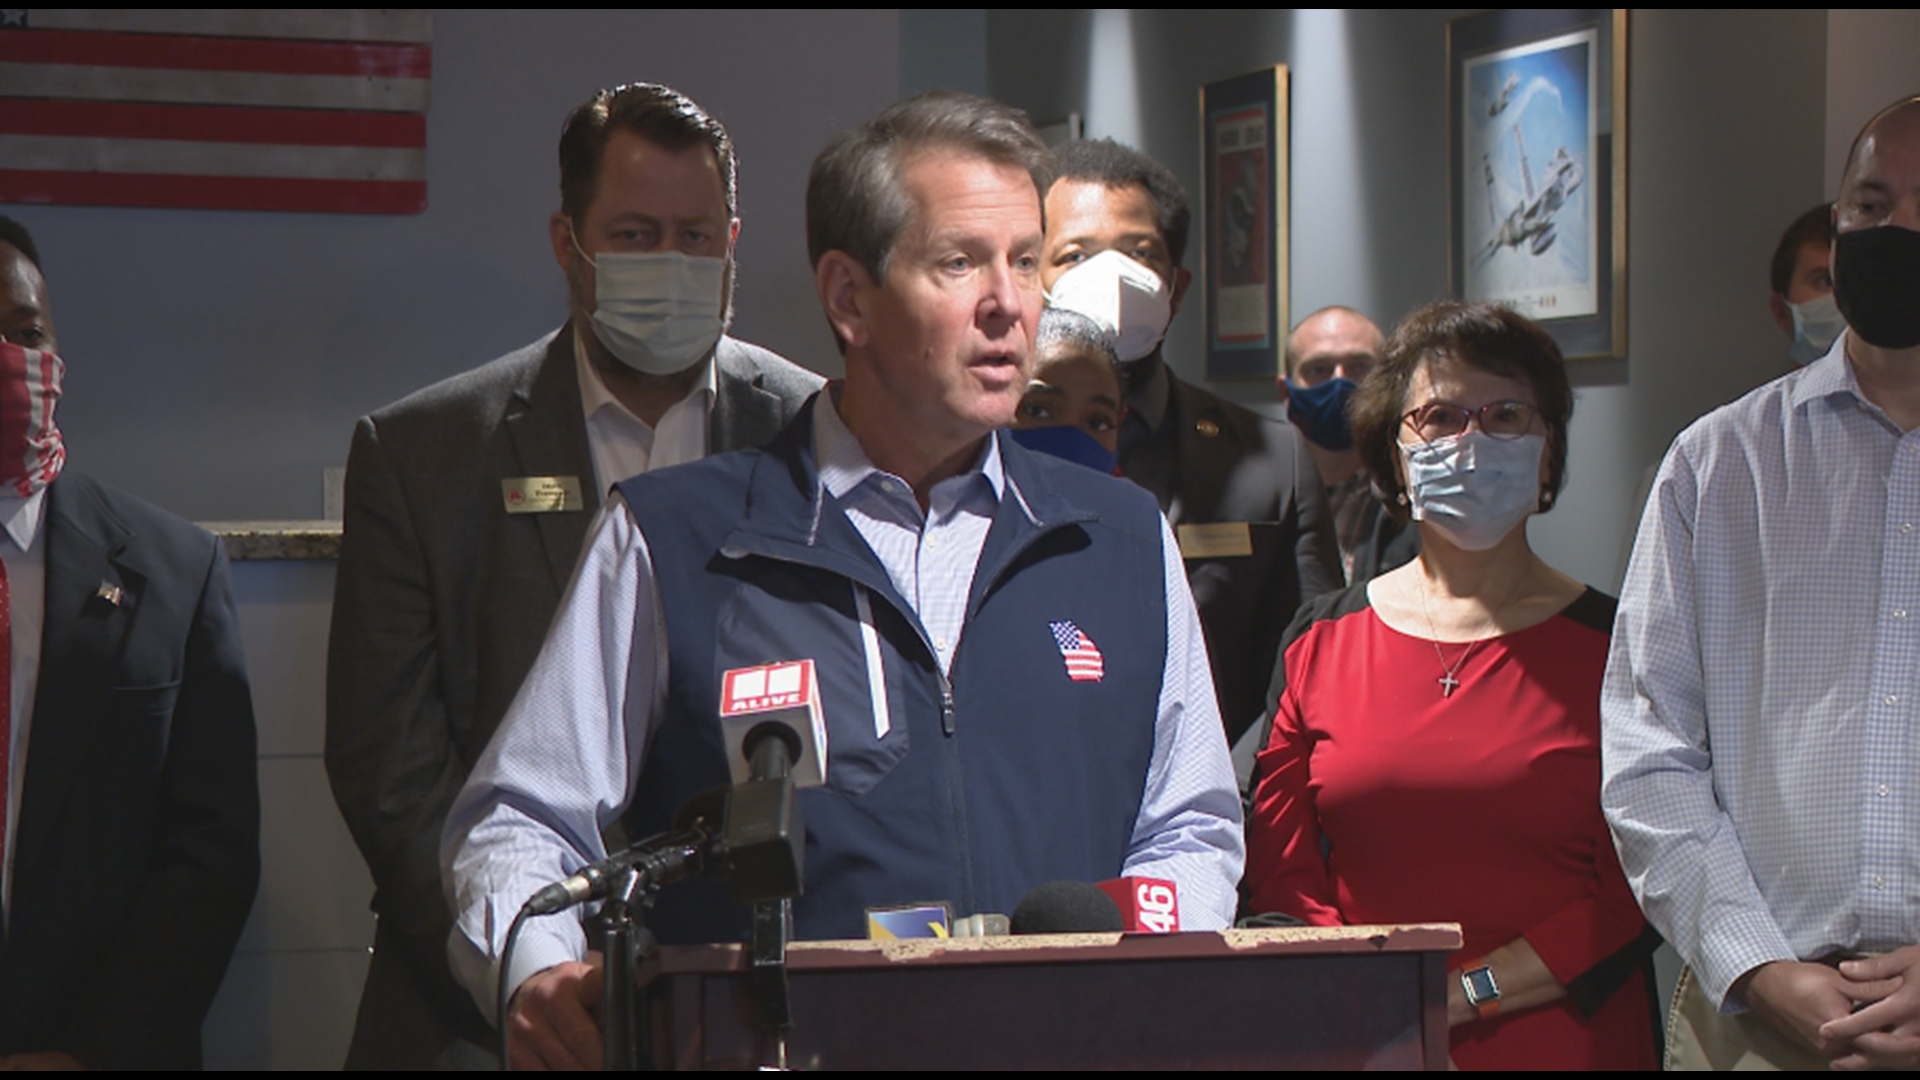 The Republican National Committee held a press conference with Governor Brian Kemp and Attorney General Carr at AJ’s Famous Seafood and PO Boys in Marietta.